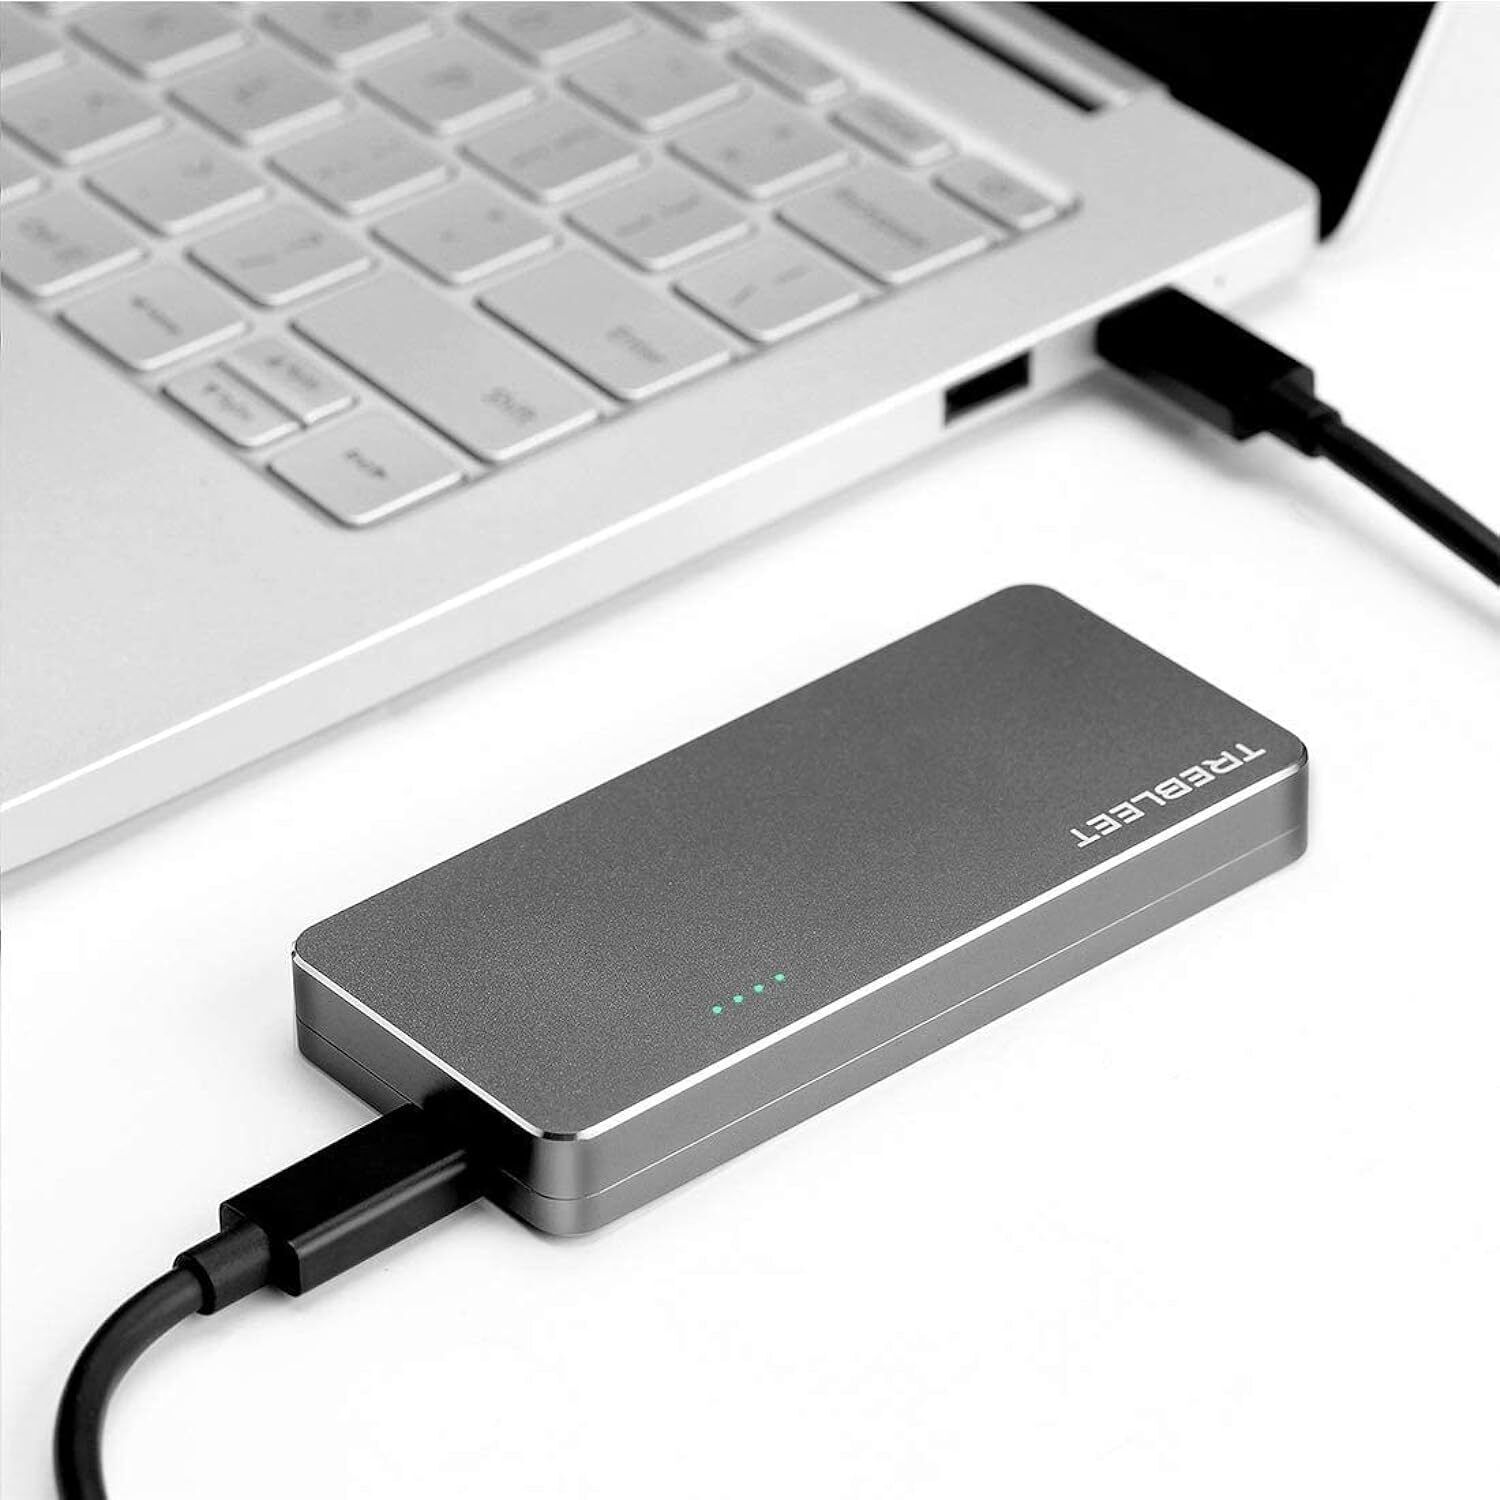 Usb4 Ssd Enclosure Compatible With Thunderbolt 3, Thunderbolt 4, 40Gbps To Nvm